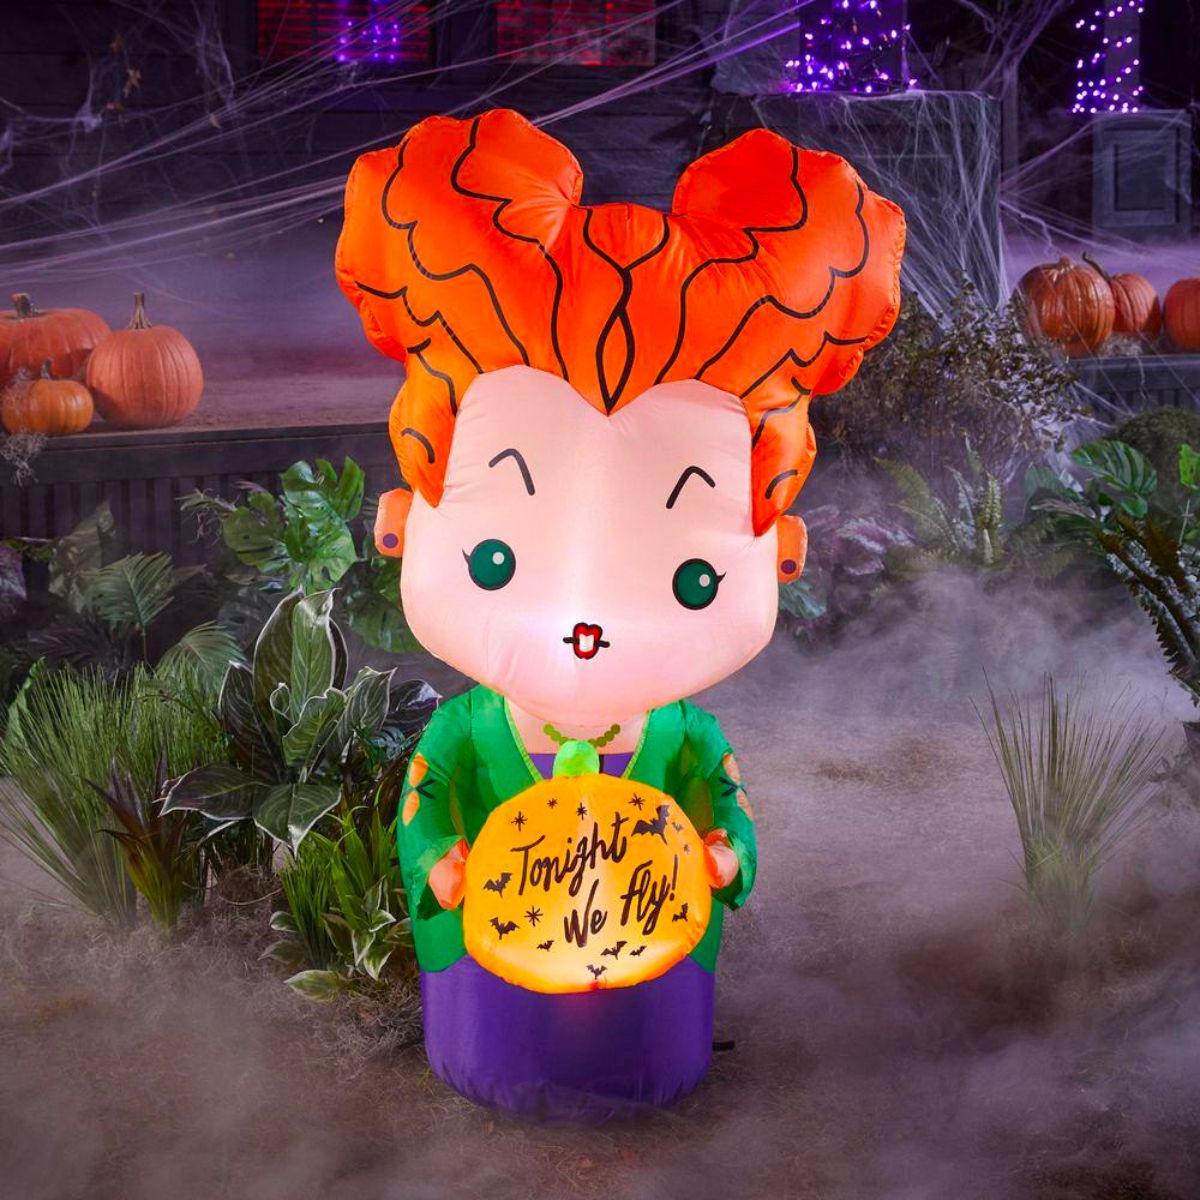 LED inflatable Winifred Sanderson